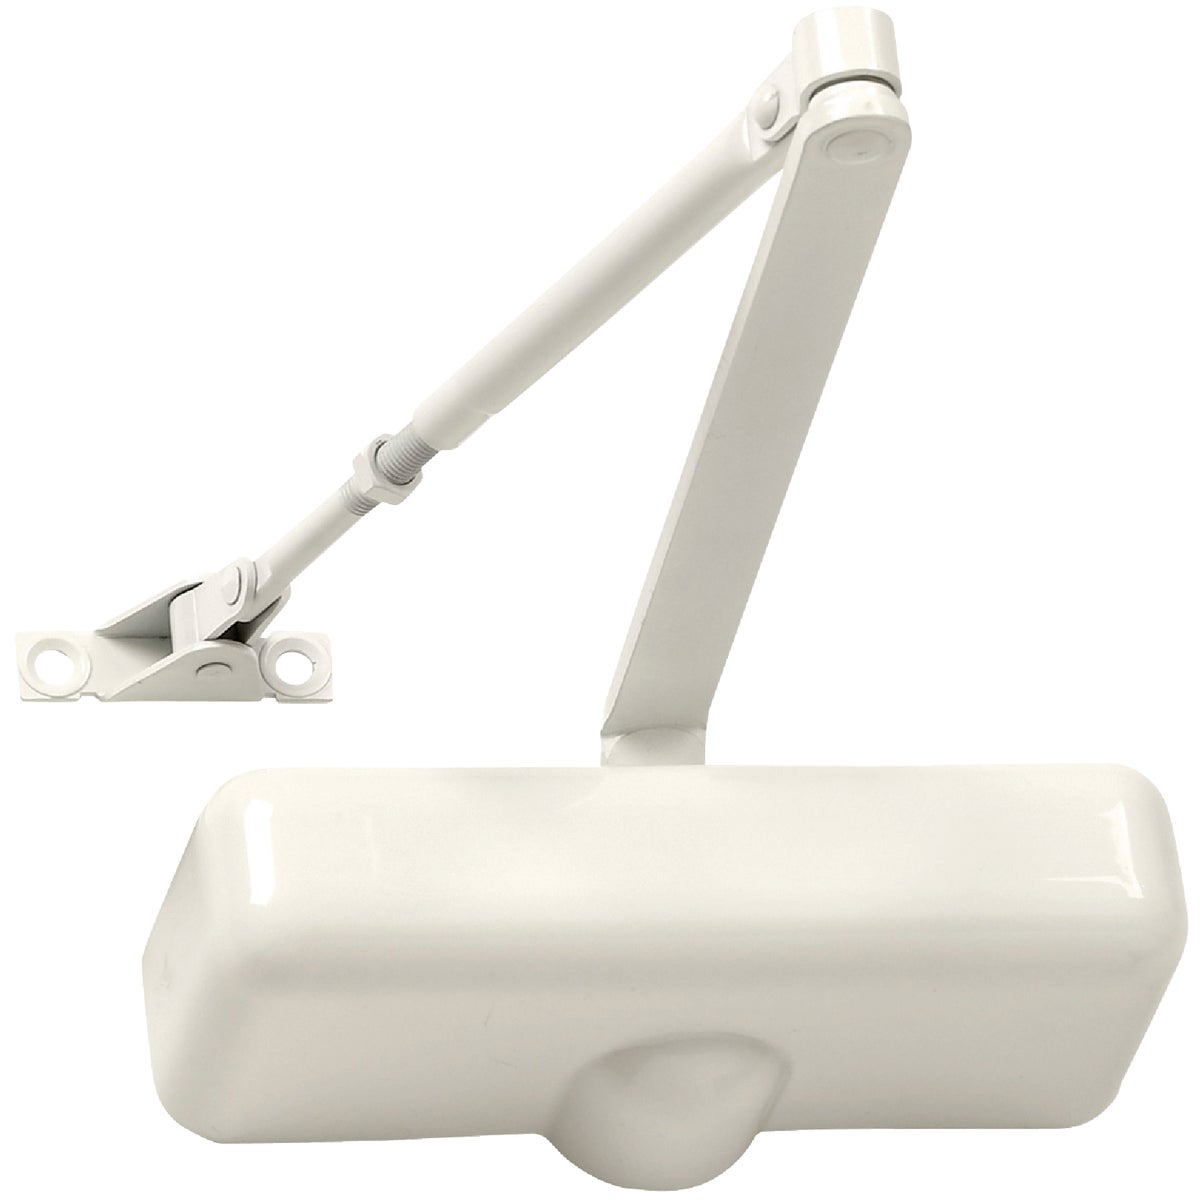 Tell 2000 Series Residential Ivory Hold Open Door Closer